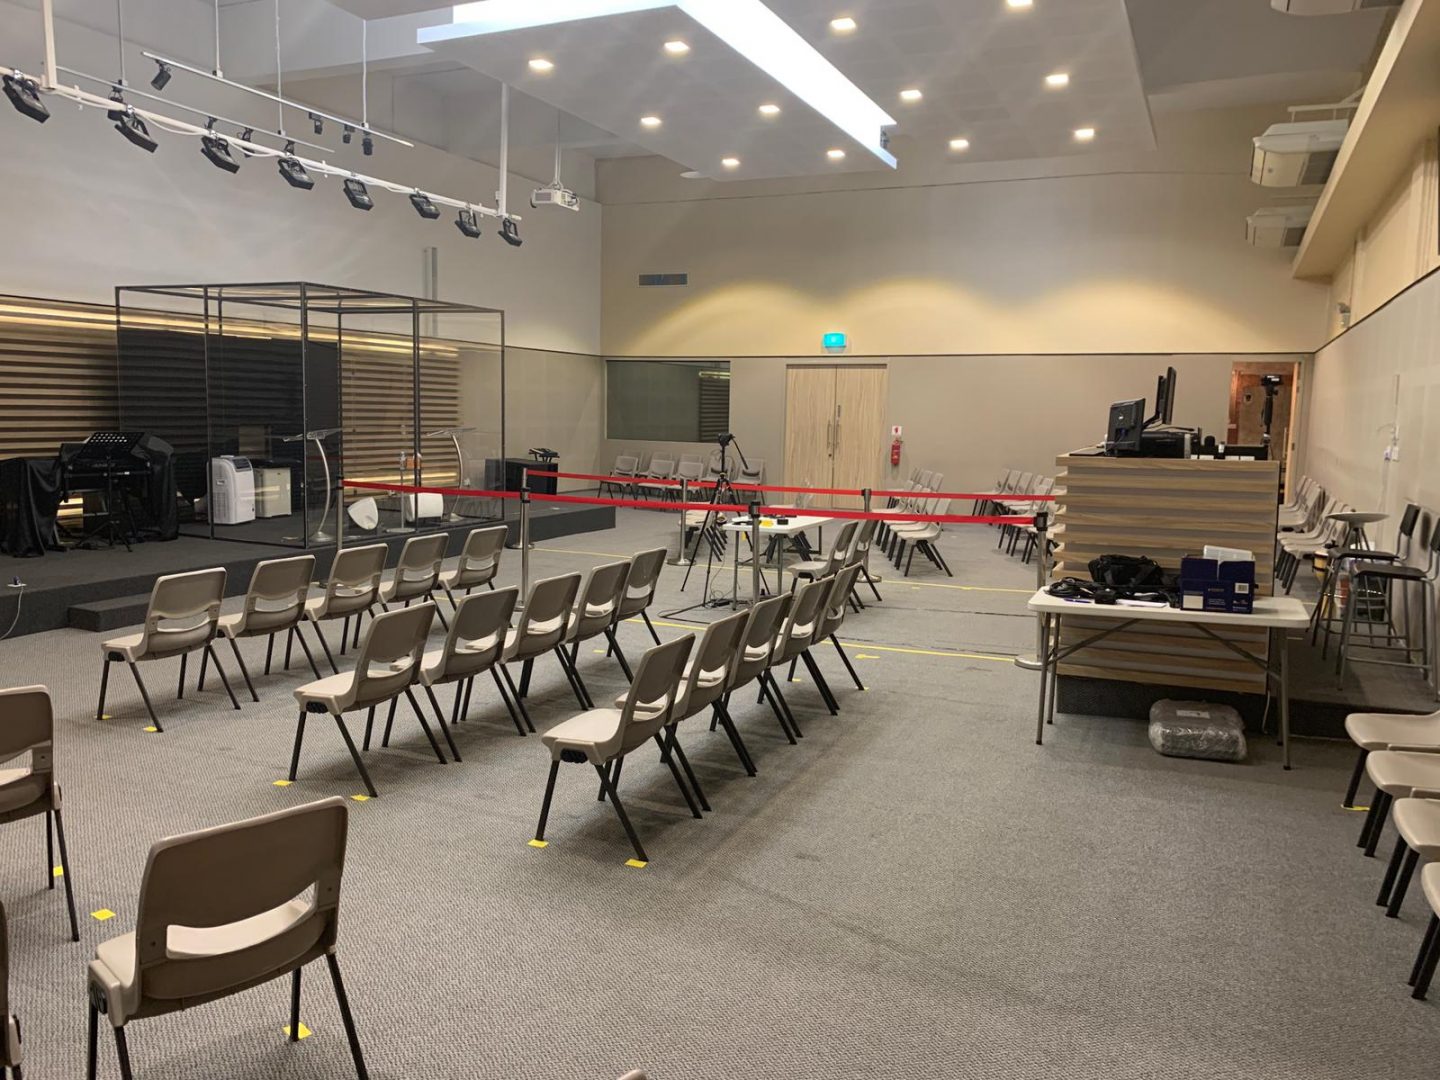 Chairs at Kingdom Life Community Church are placed in clusters of five. Photo courtesy of Pastor Benjamin Chew.